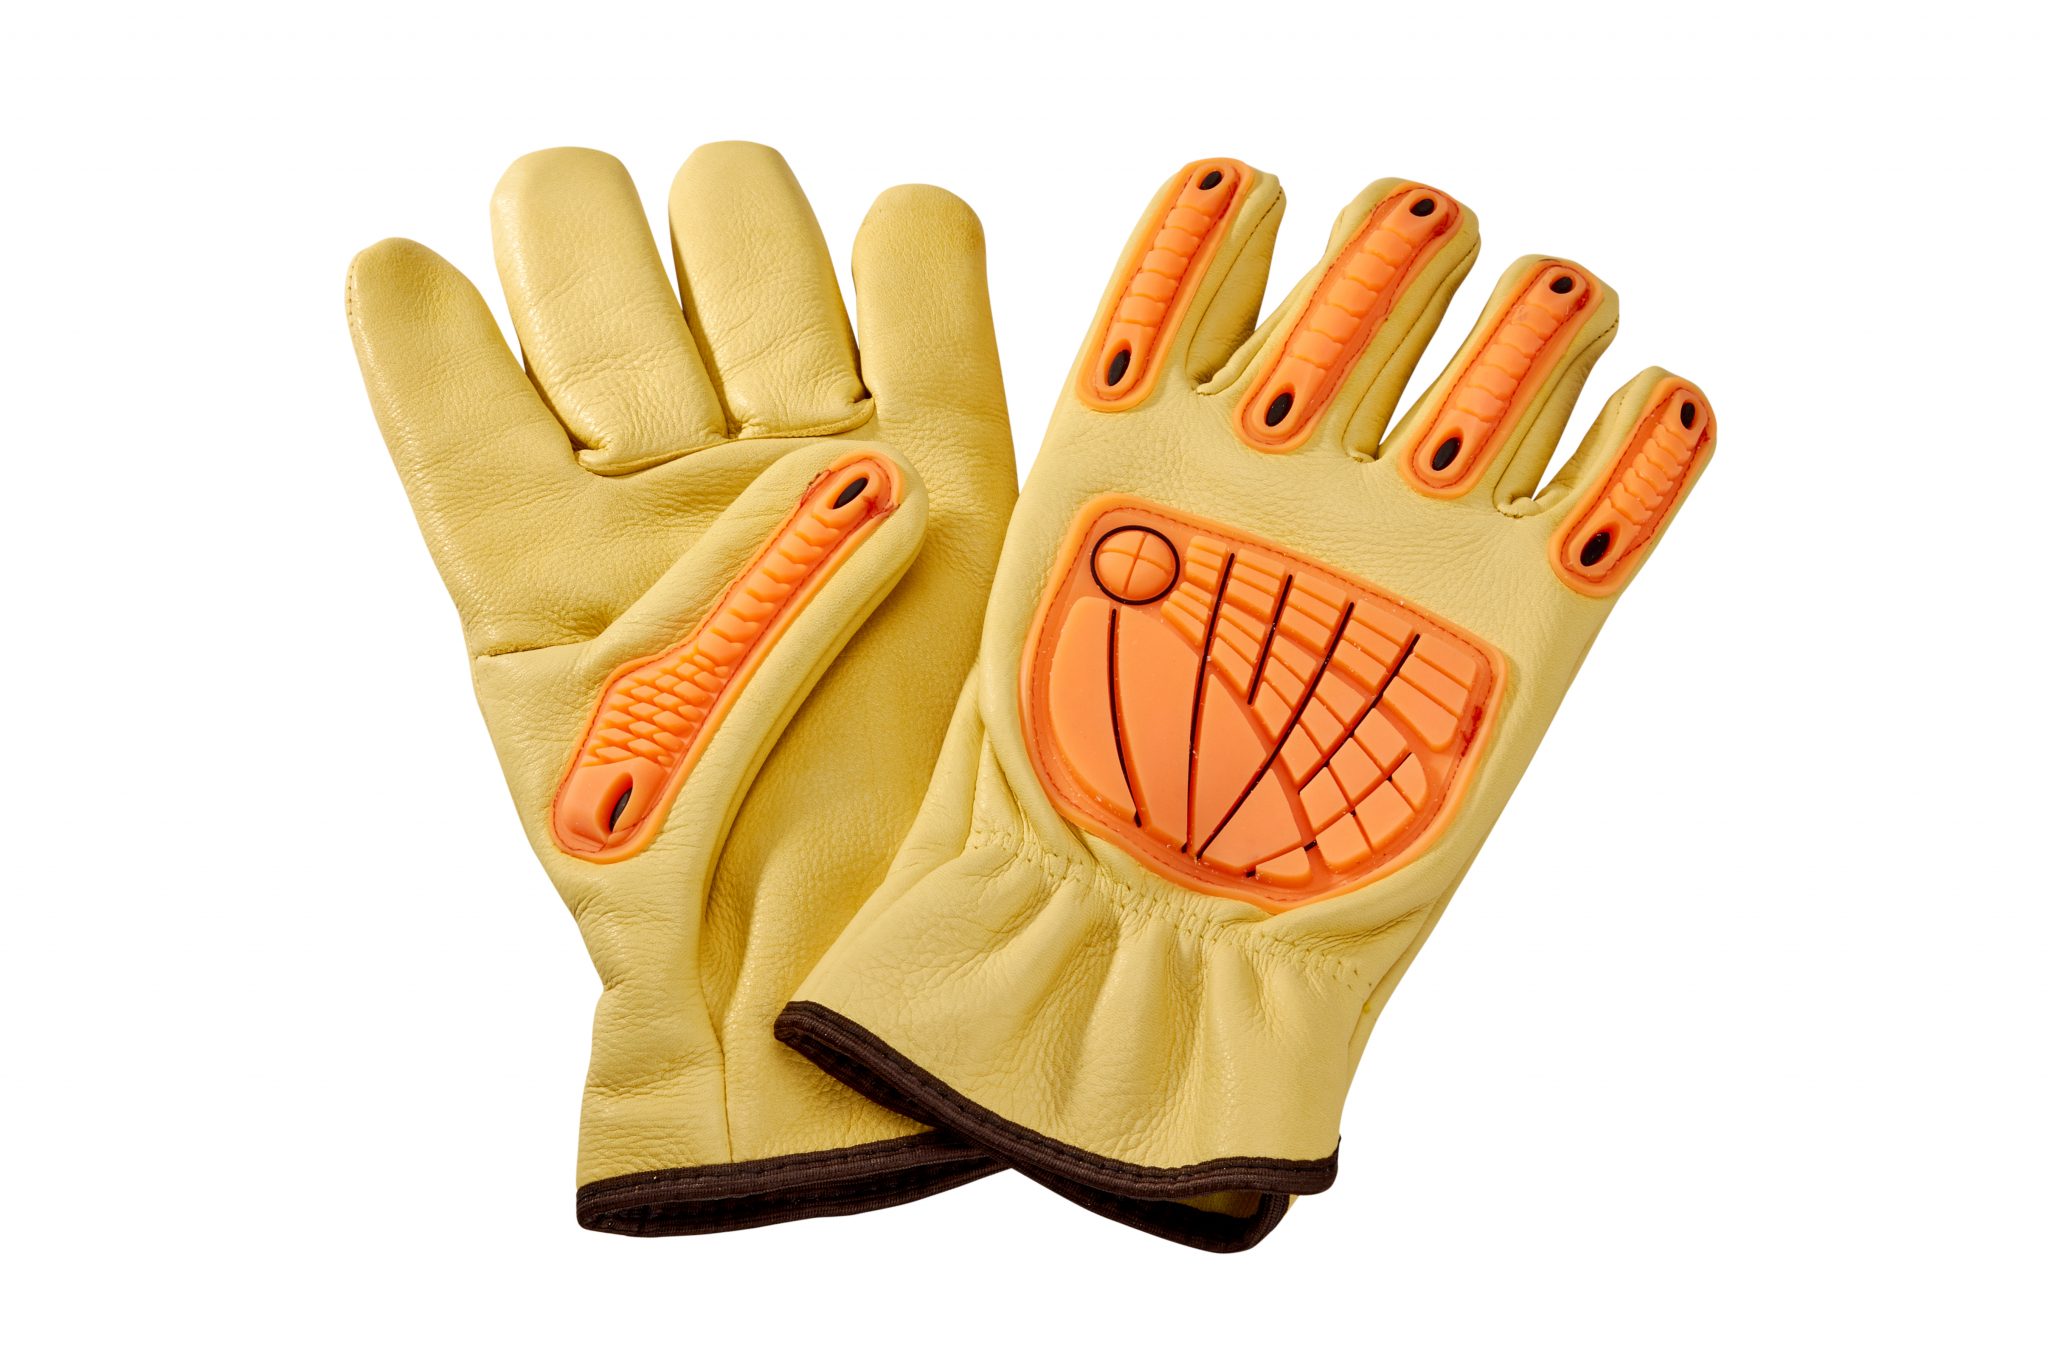 Protects only in the places where impact occurs so glove stays fully flexible.